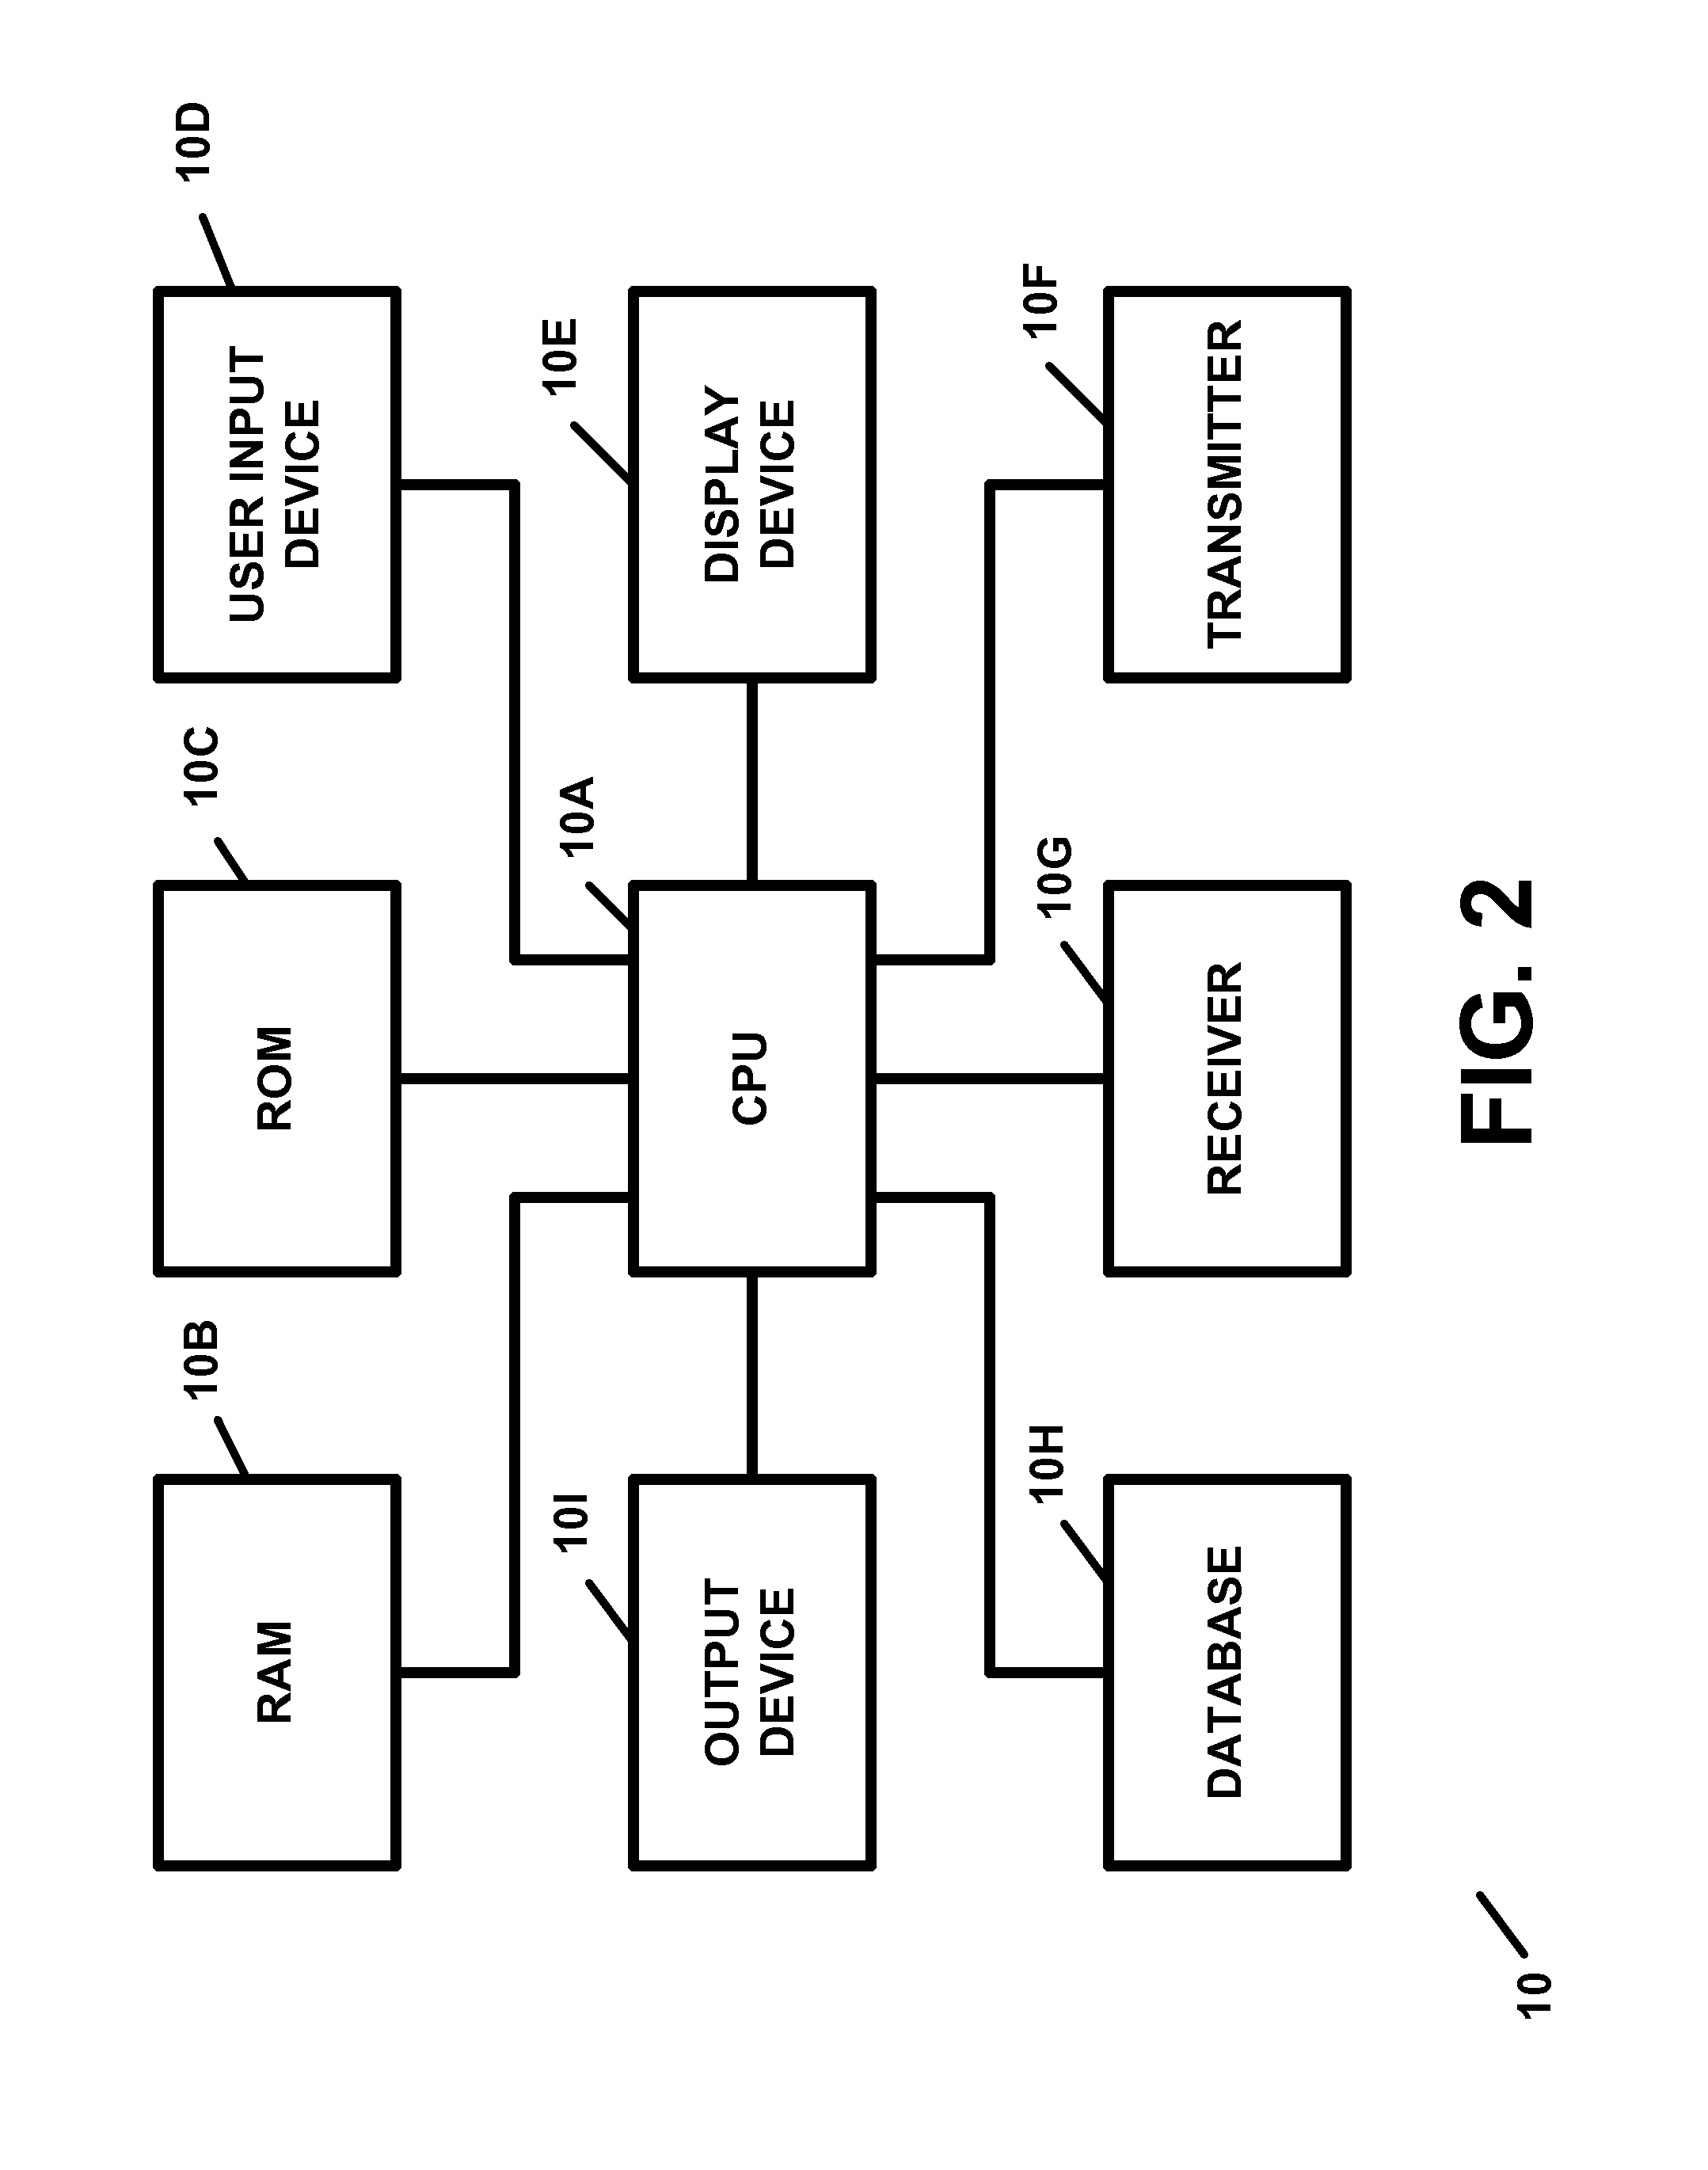 Apparatus and method for processing and/or providing healthcare information and/or healthcare-related information with or using an electronic healthcare record or electronic healthcare records